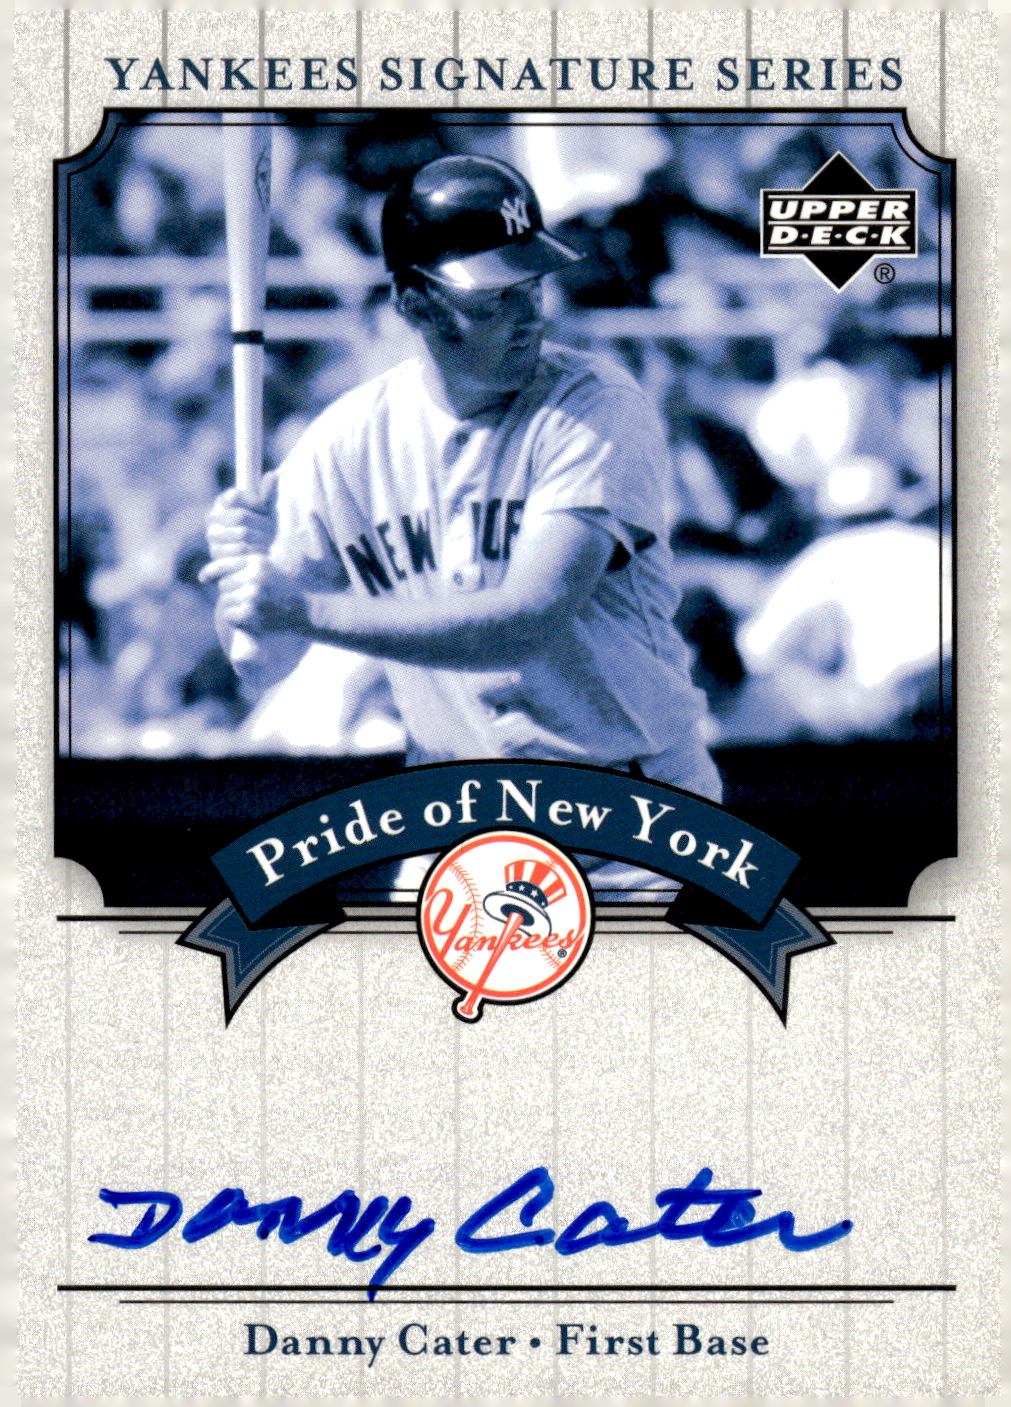 2003 Upper Deck Yankees Signature Pride of New York Autographs #DC Danny Cater